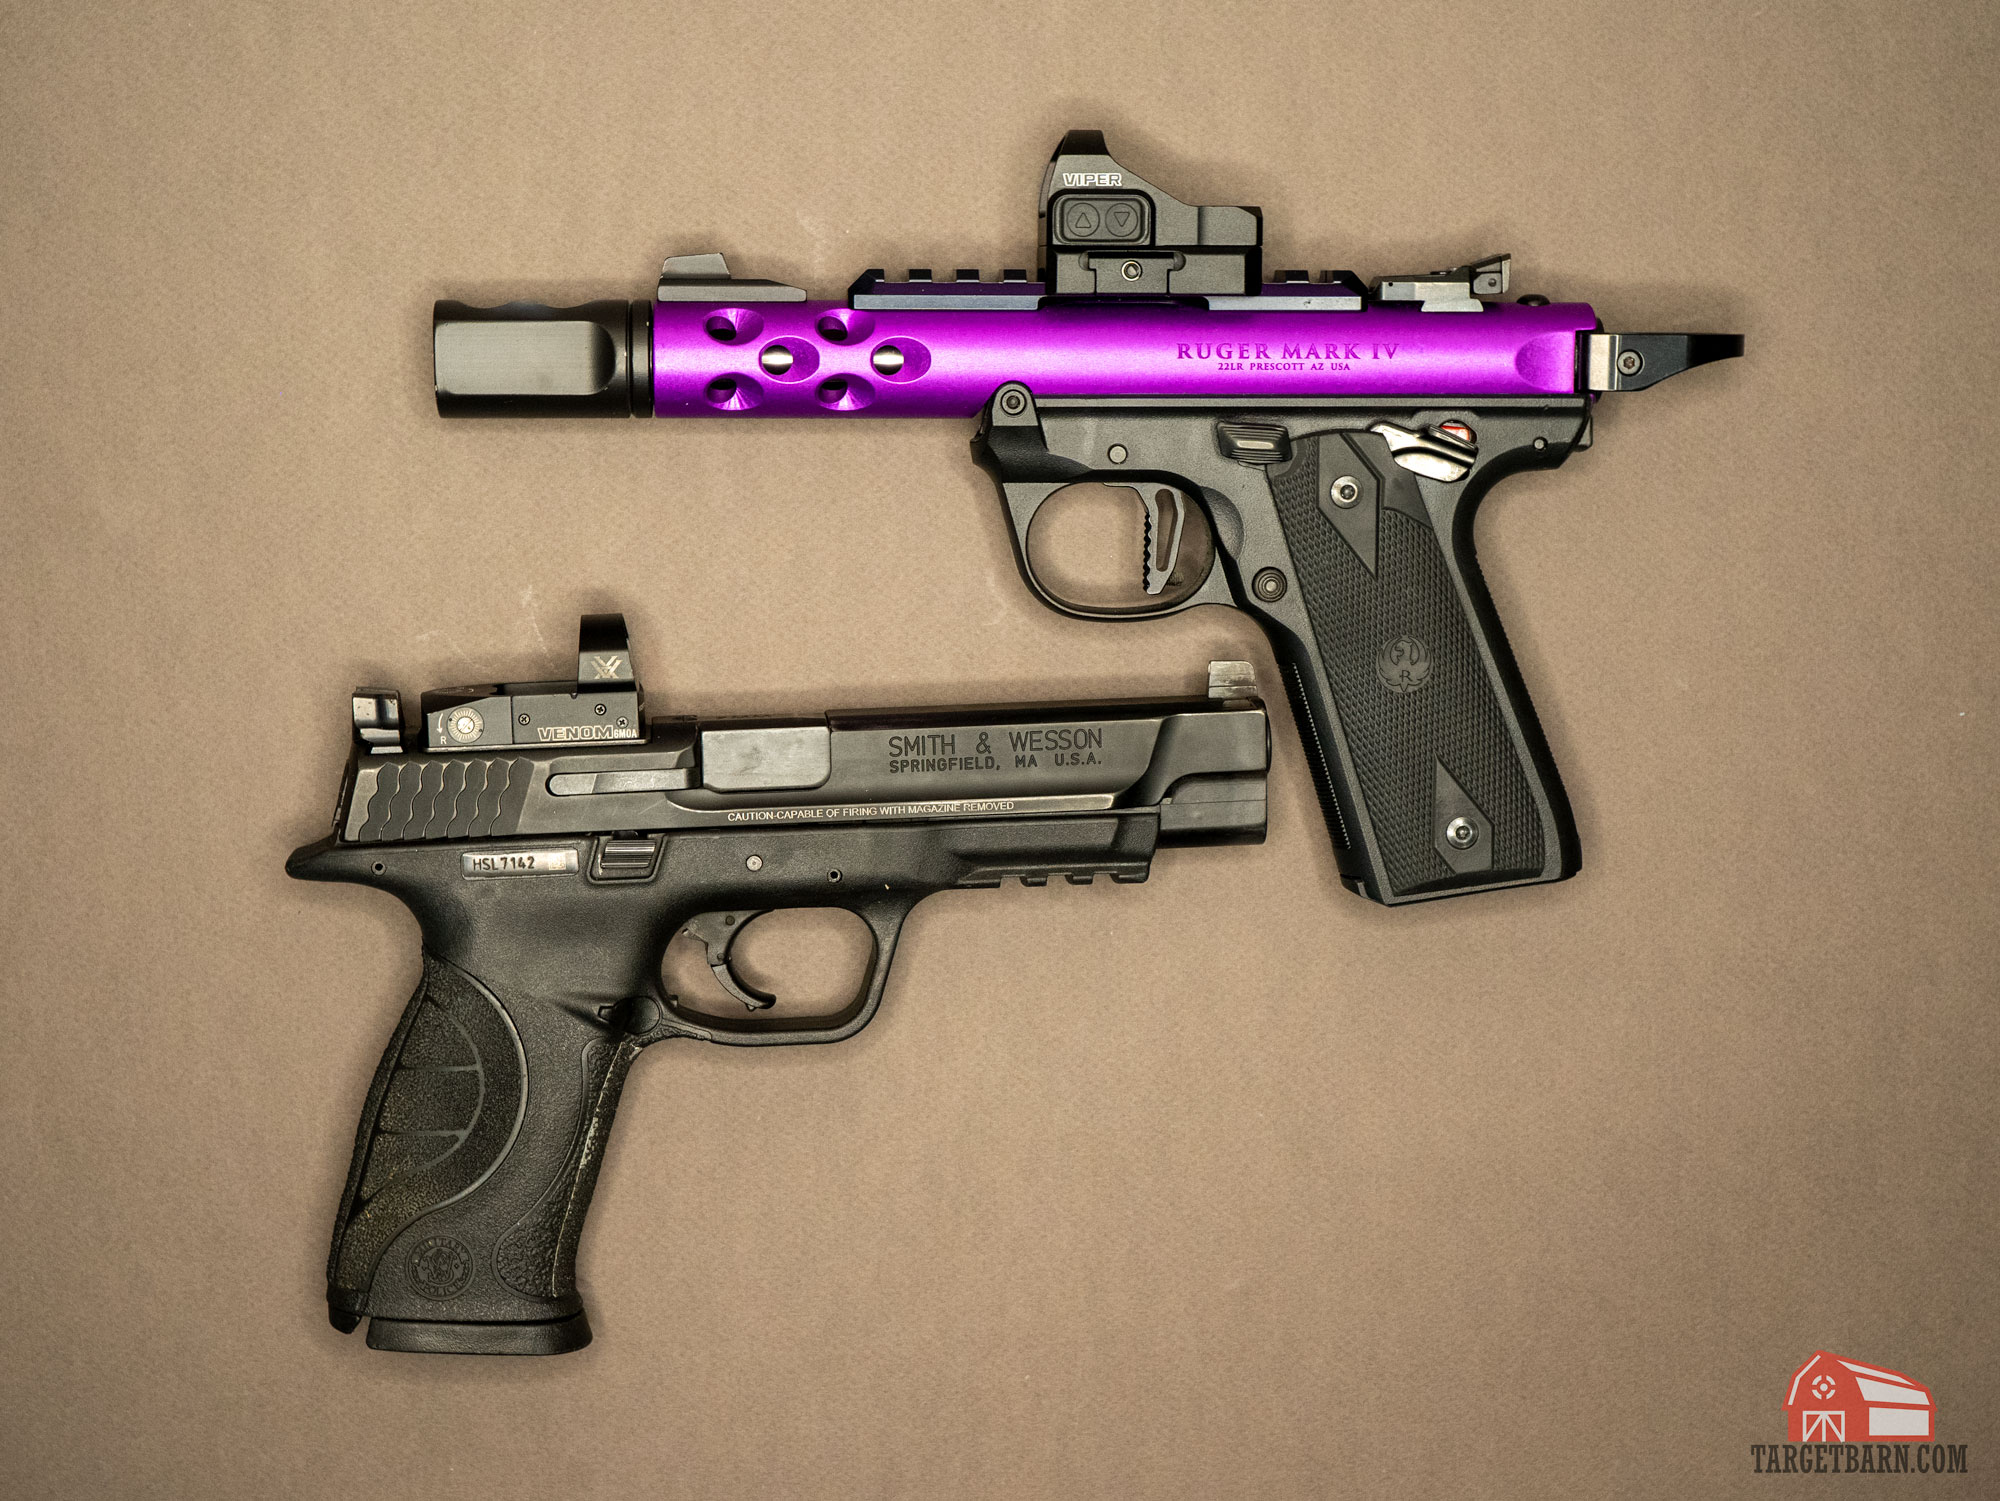 the venom and viper mounted on two different pistols